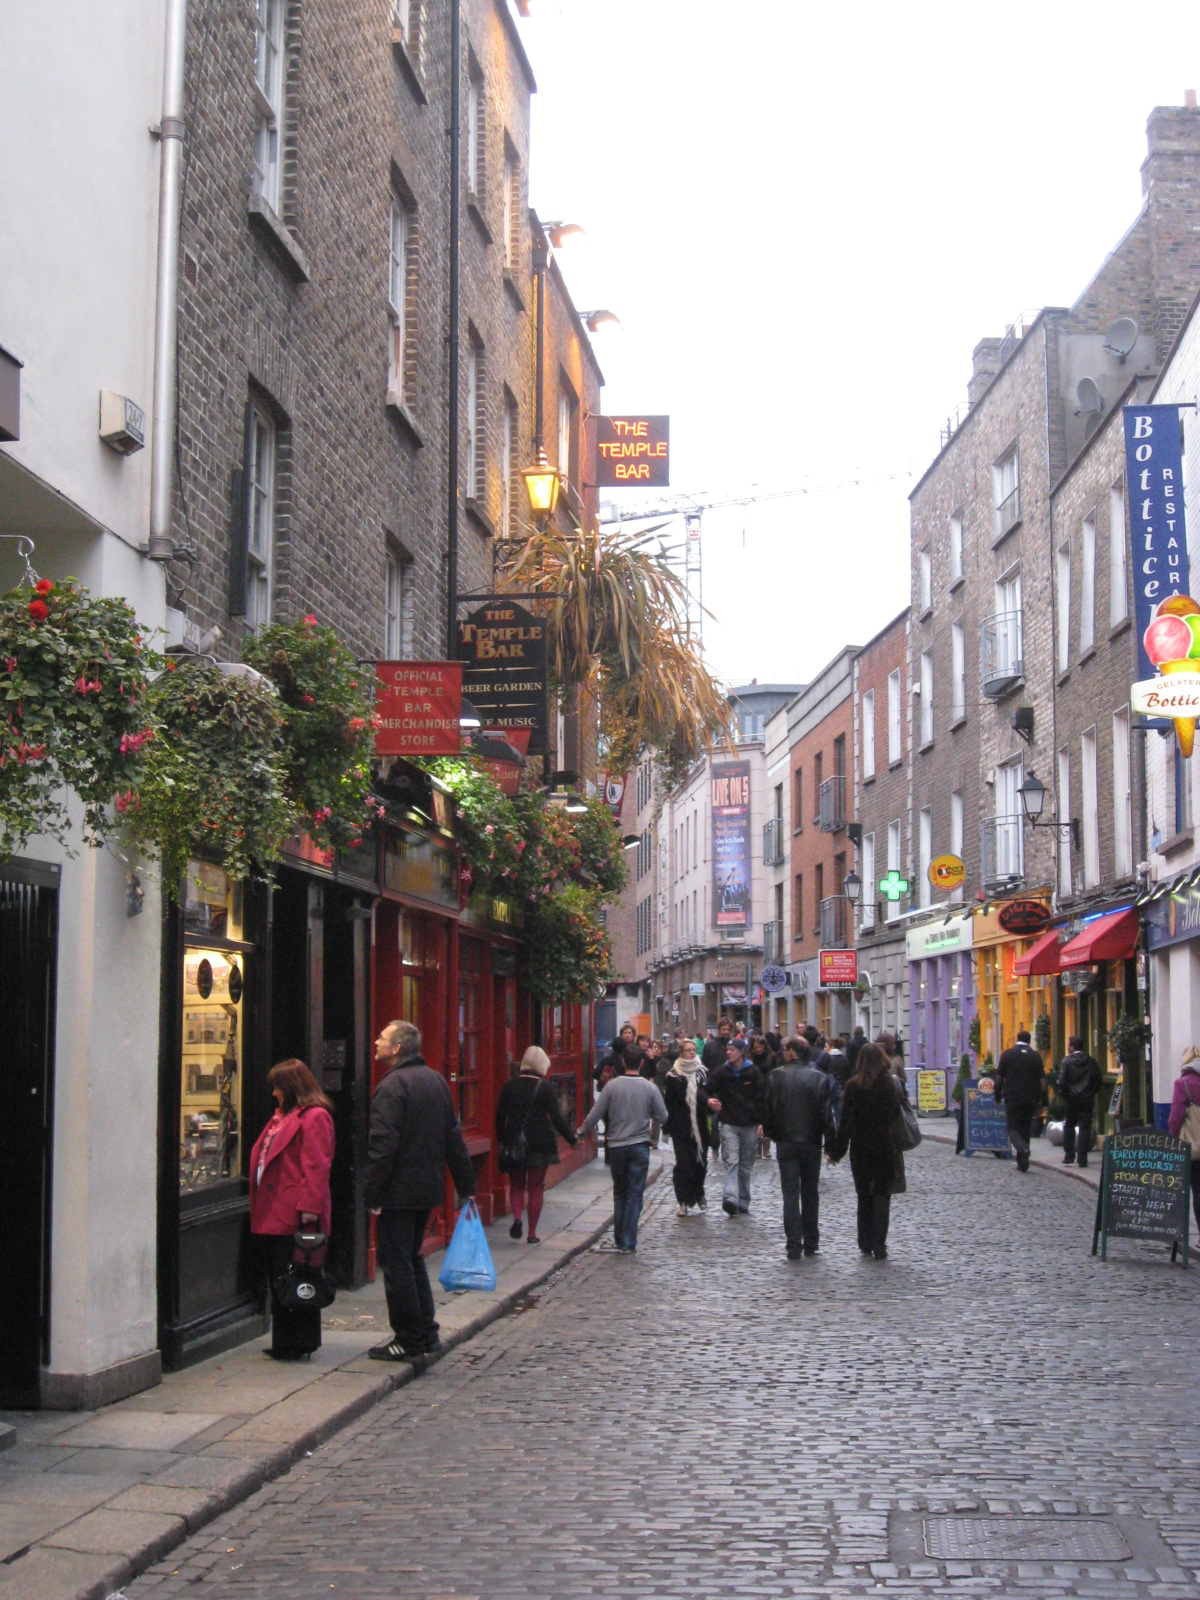 A view of the famous Temple Bar region seen from Fleet Street